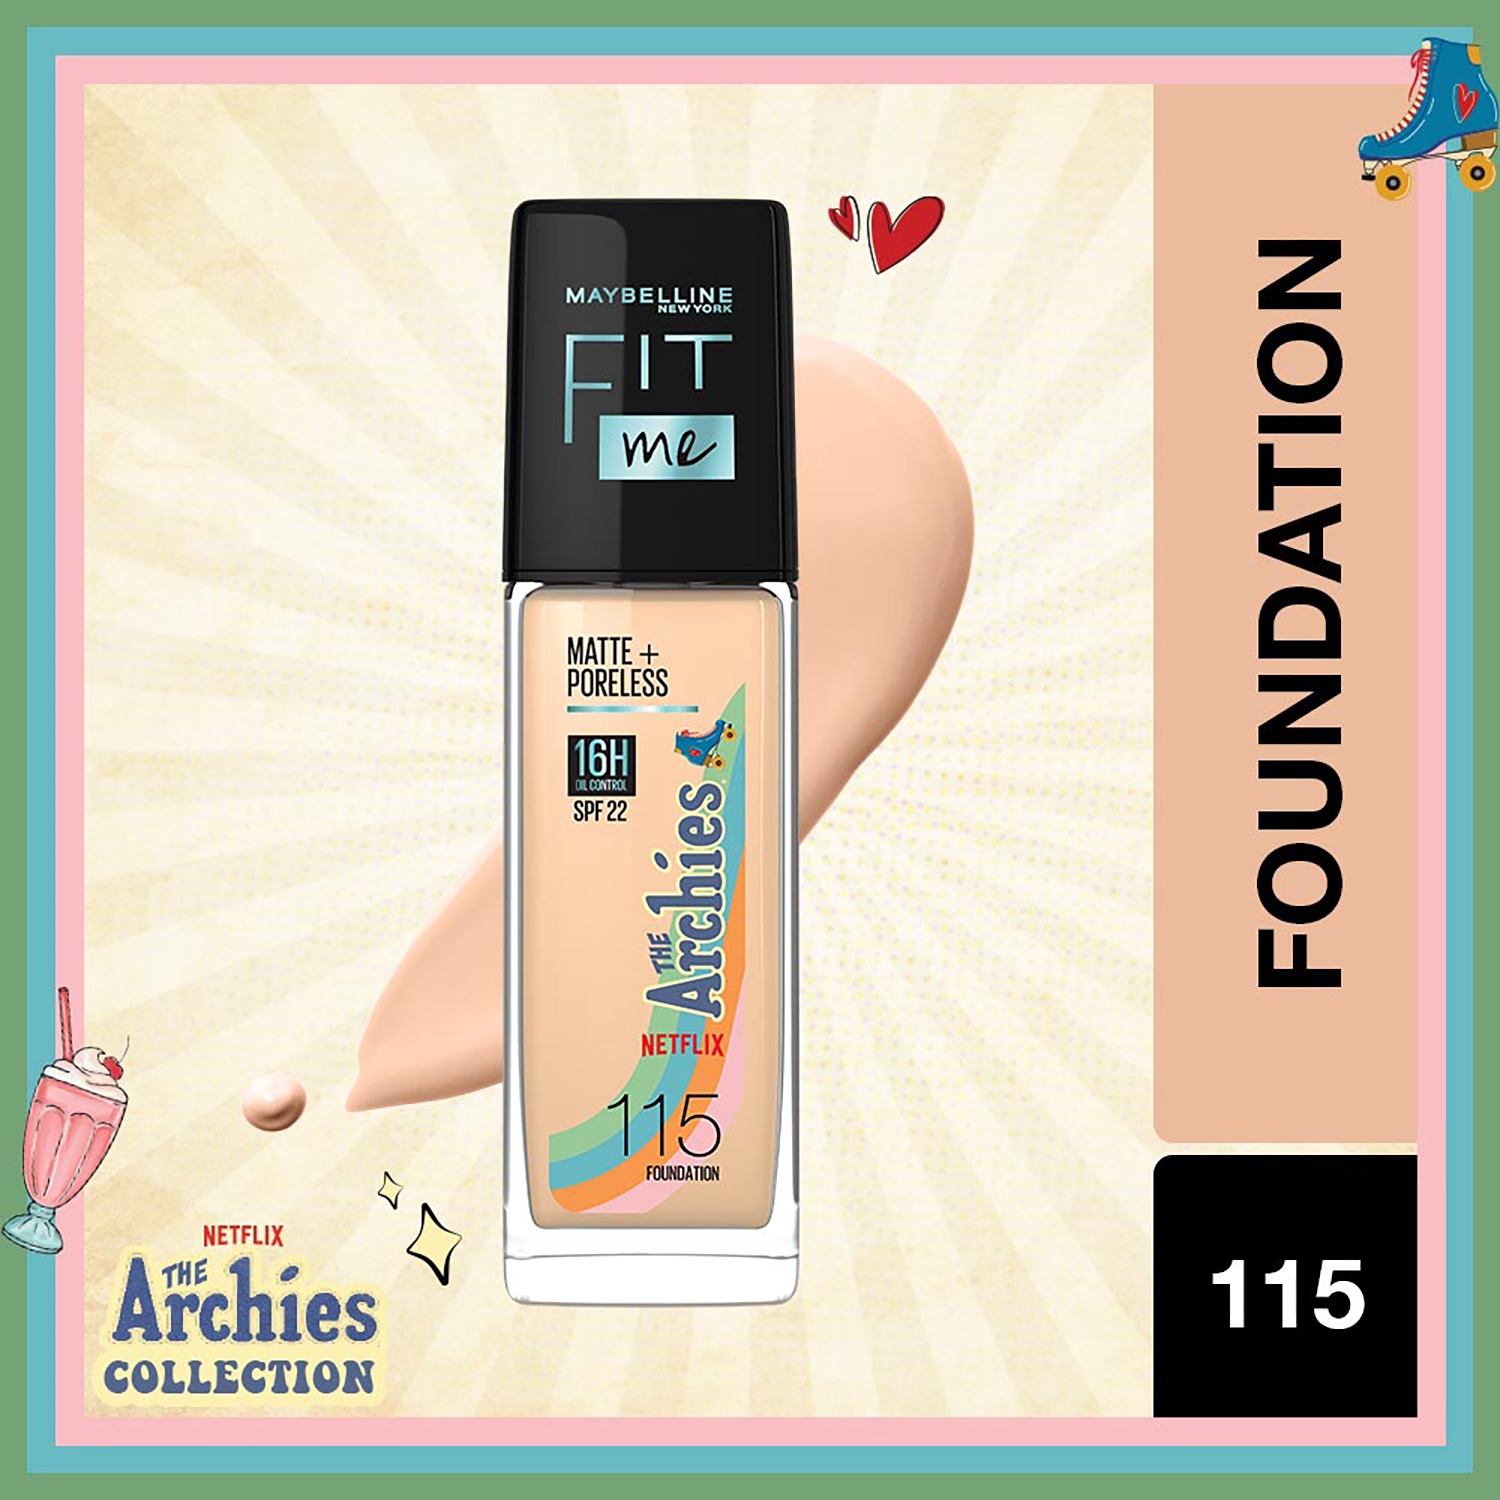 Maybelline NY Fit Me Matte+Poreless Foundation The Archies Collection - 115  (30ml)